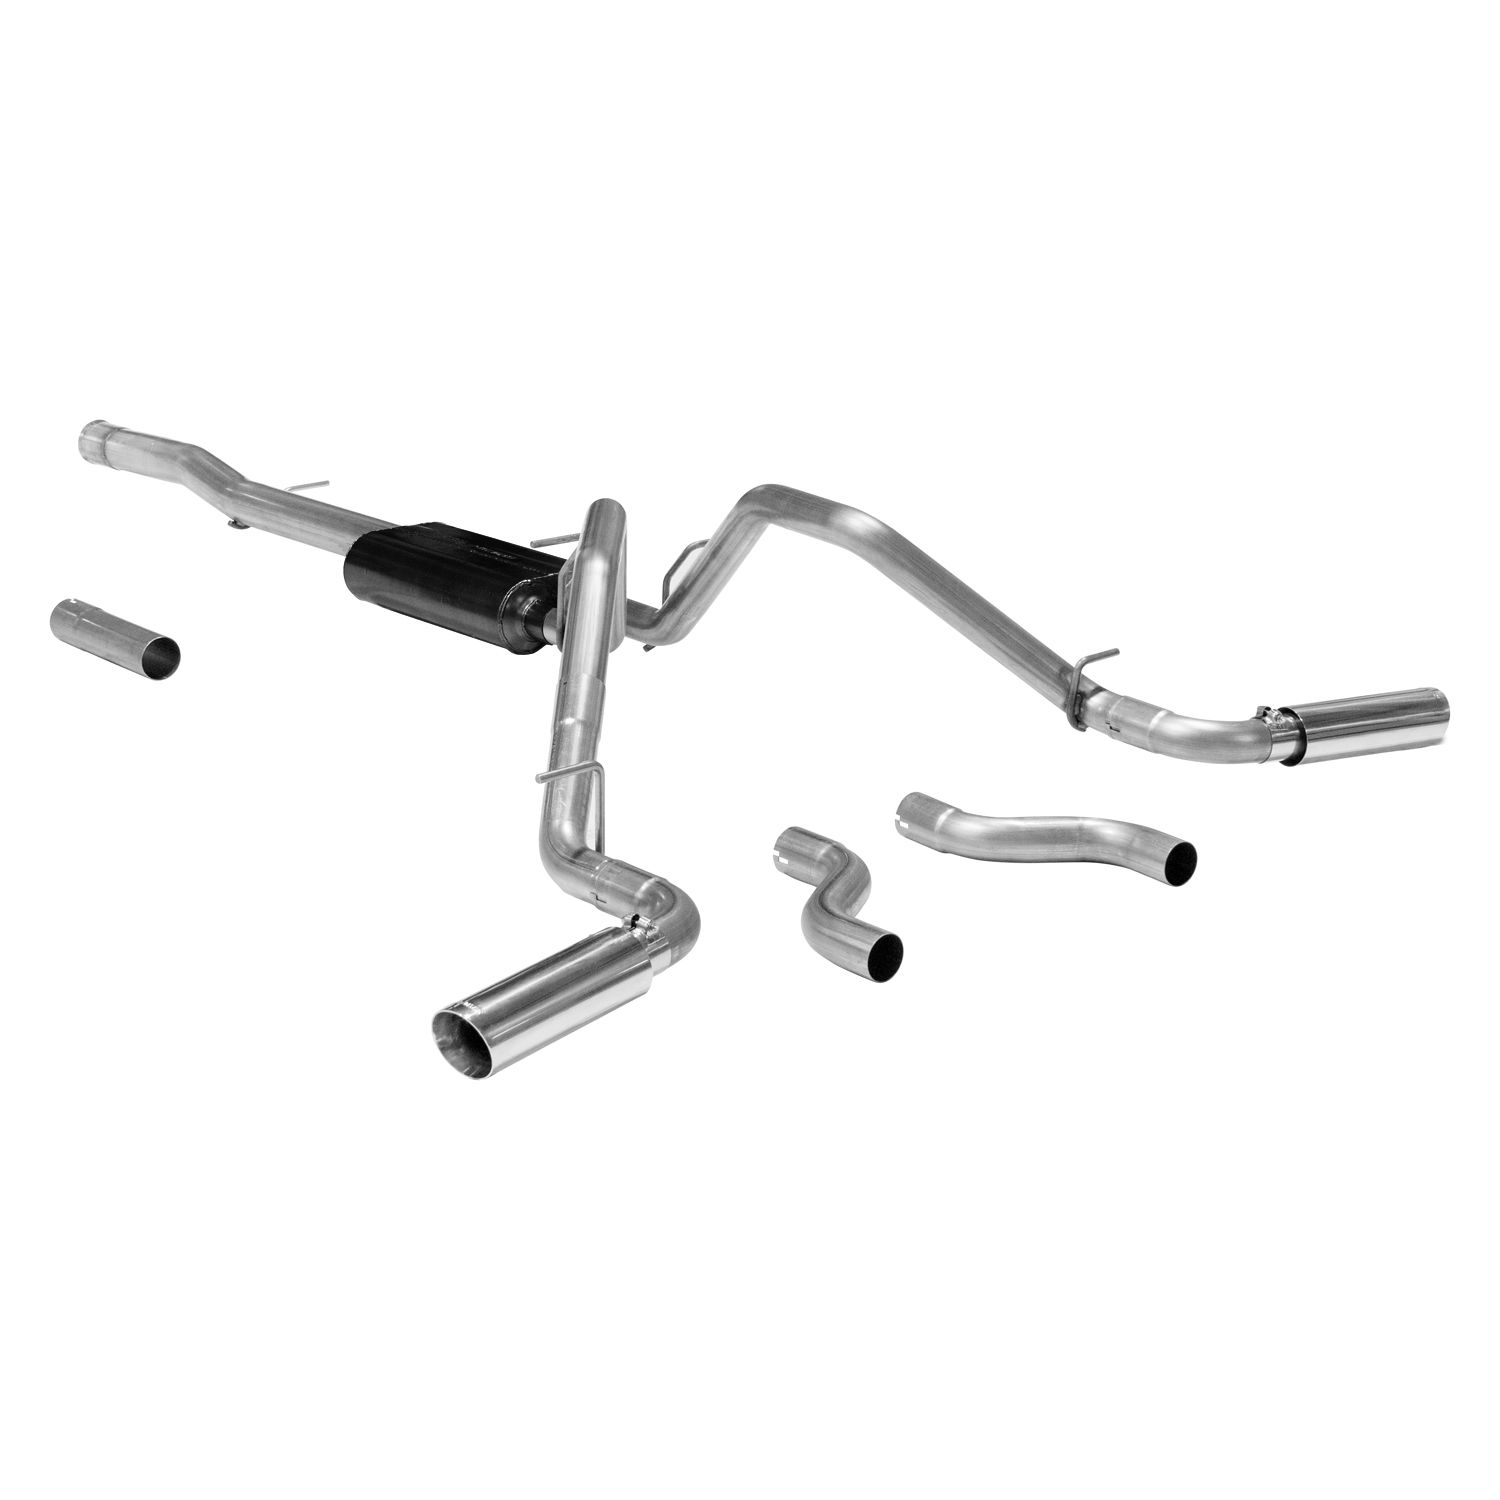 2011-2013 Chevrolet Silverado 1500 LT 6.2L Crew Cab/EXT Cab Flowmaster American Thunder Cat-Back Exhaust 69.3 inch Bed